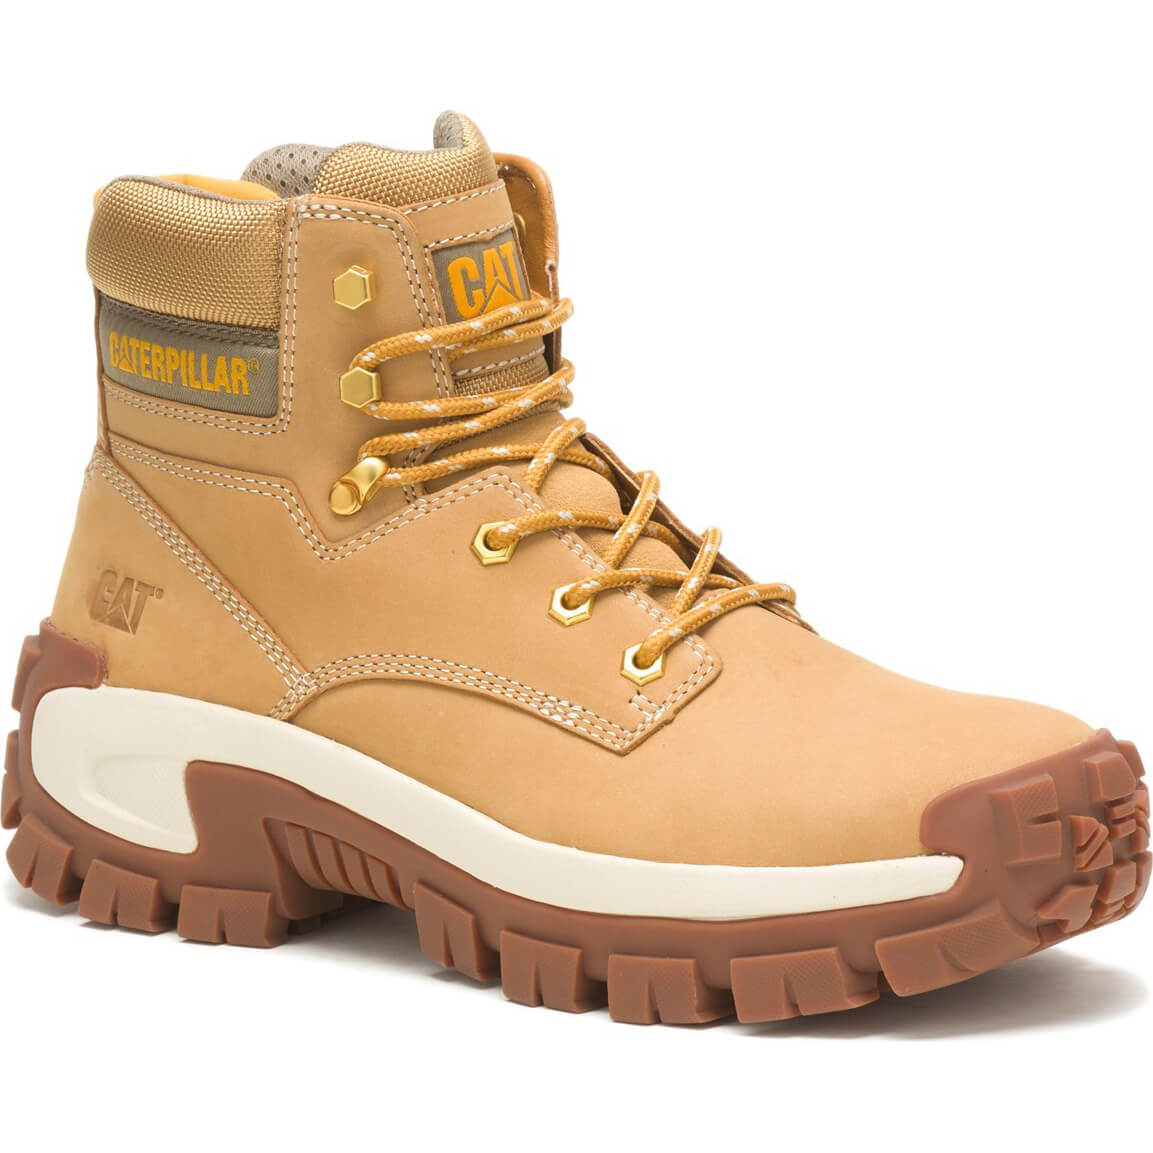 Image of Caterpillar Mens Invader Hiker Safety Boot Honey Size 12